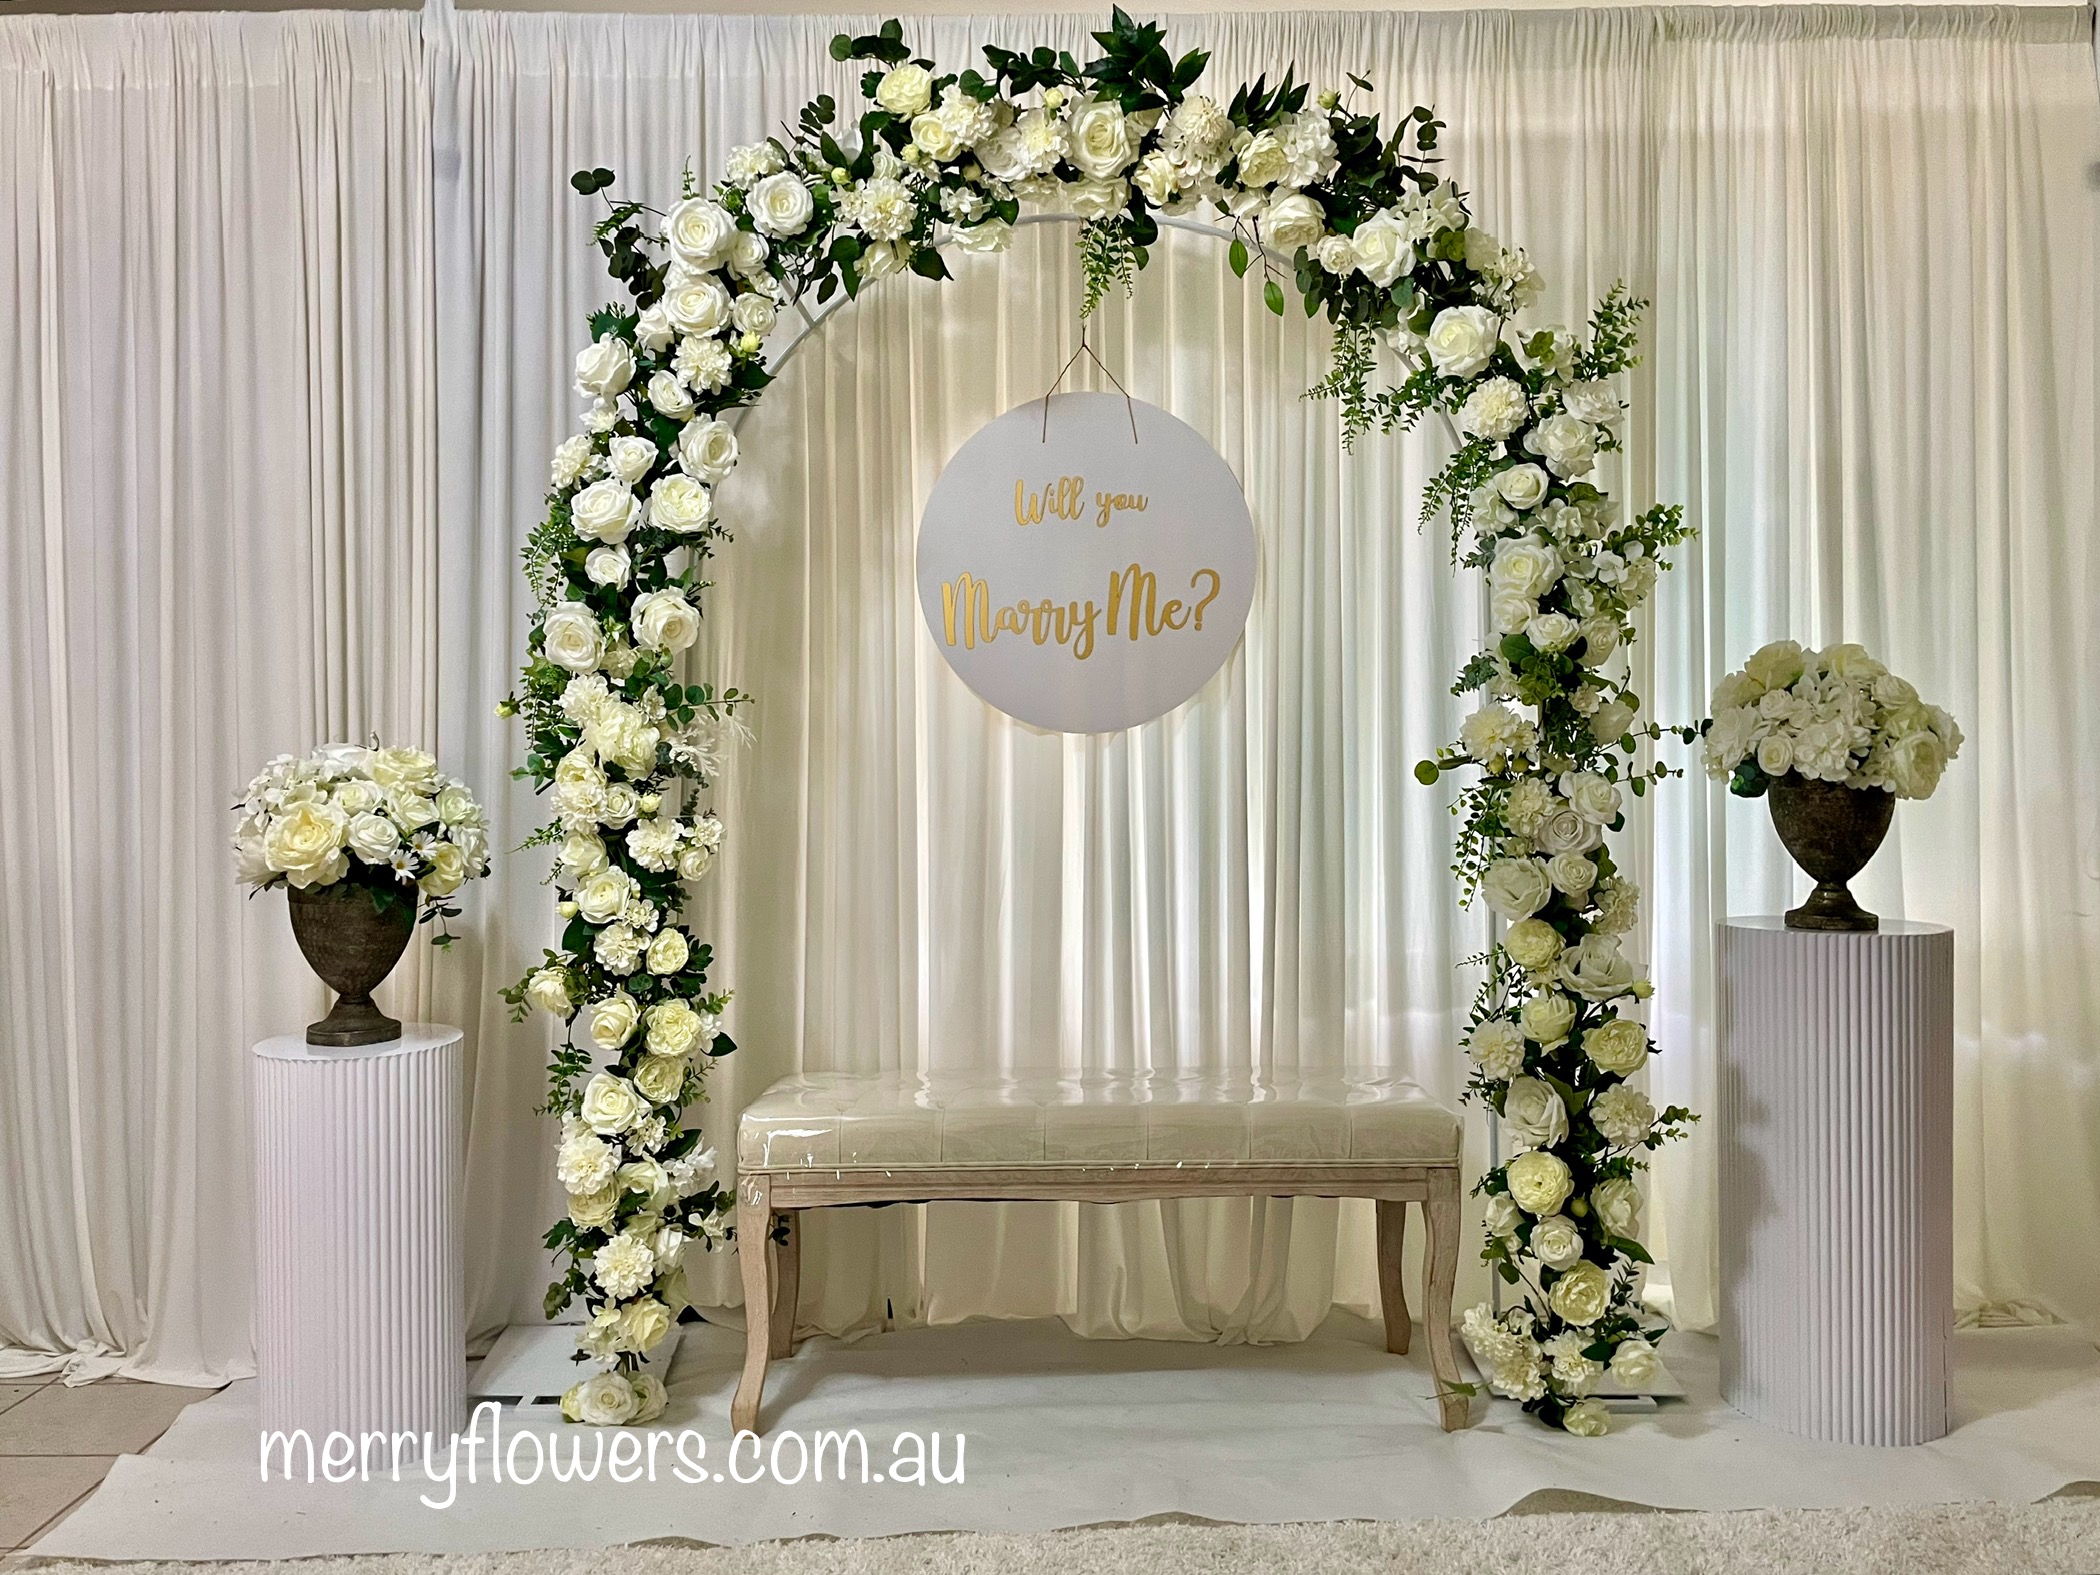 A21 -Full Flowers Arch set up